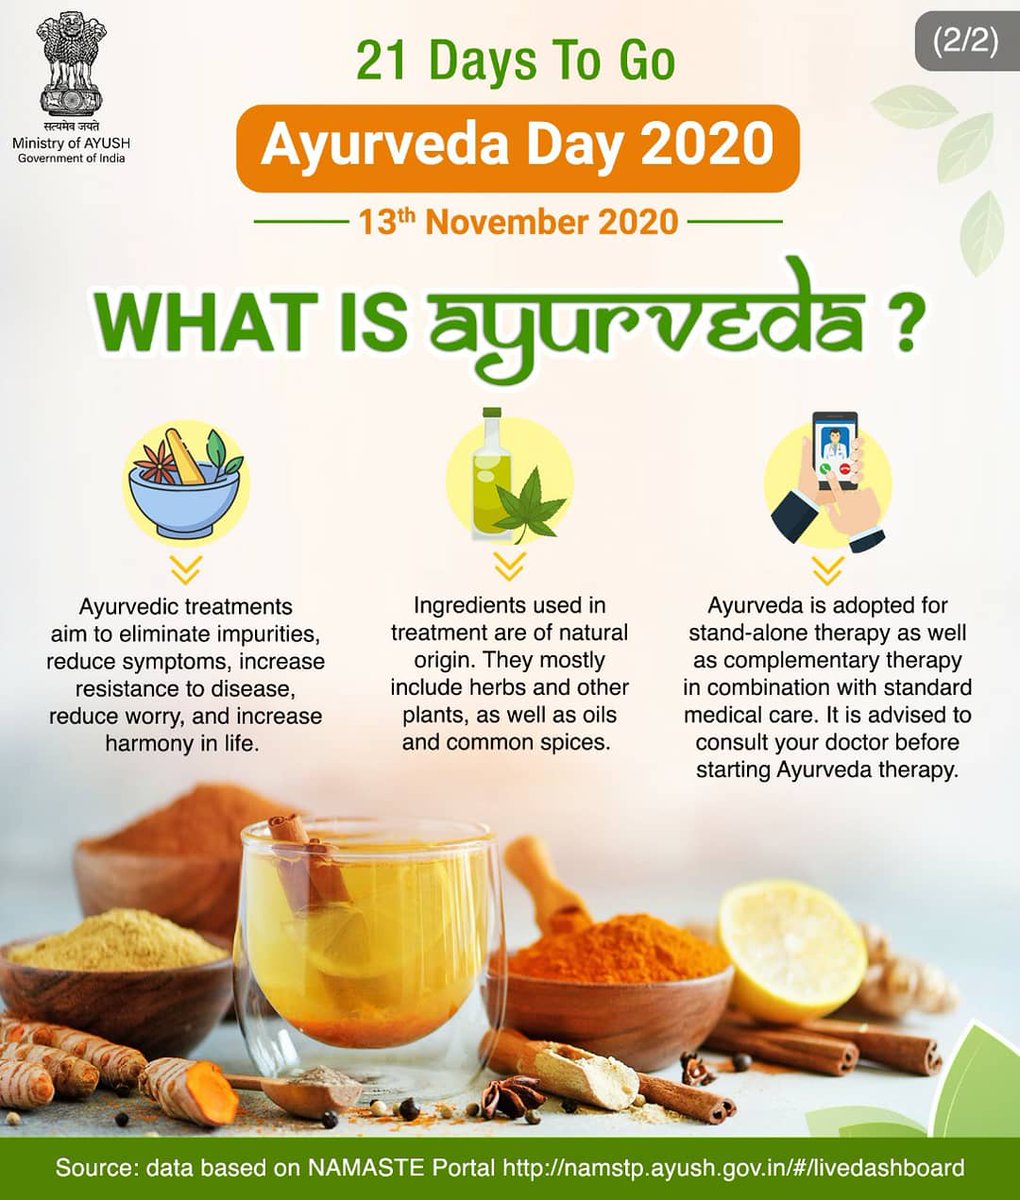 What is Ayurveda? #Ayurveda, a natural system of medicine, is widely considered by scholars to be the oldest  #healthcare system. It originated in India more than 3,000 years ago. Some scholars place its antiquity to 5,000 years.